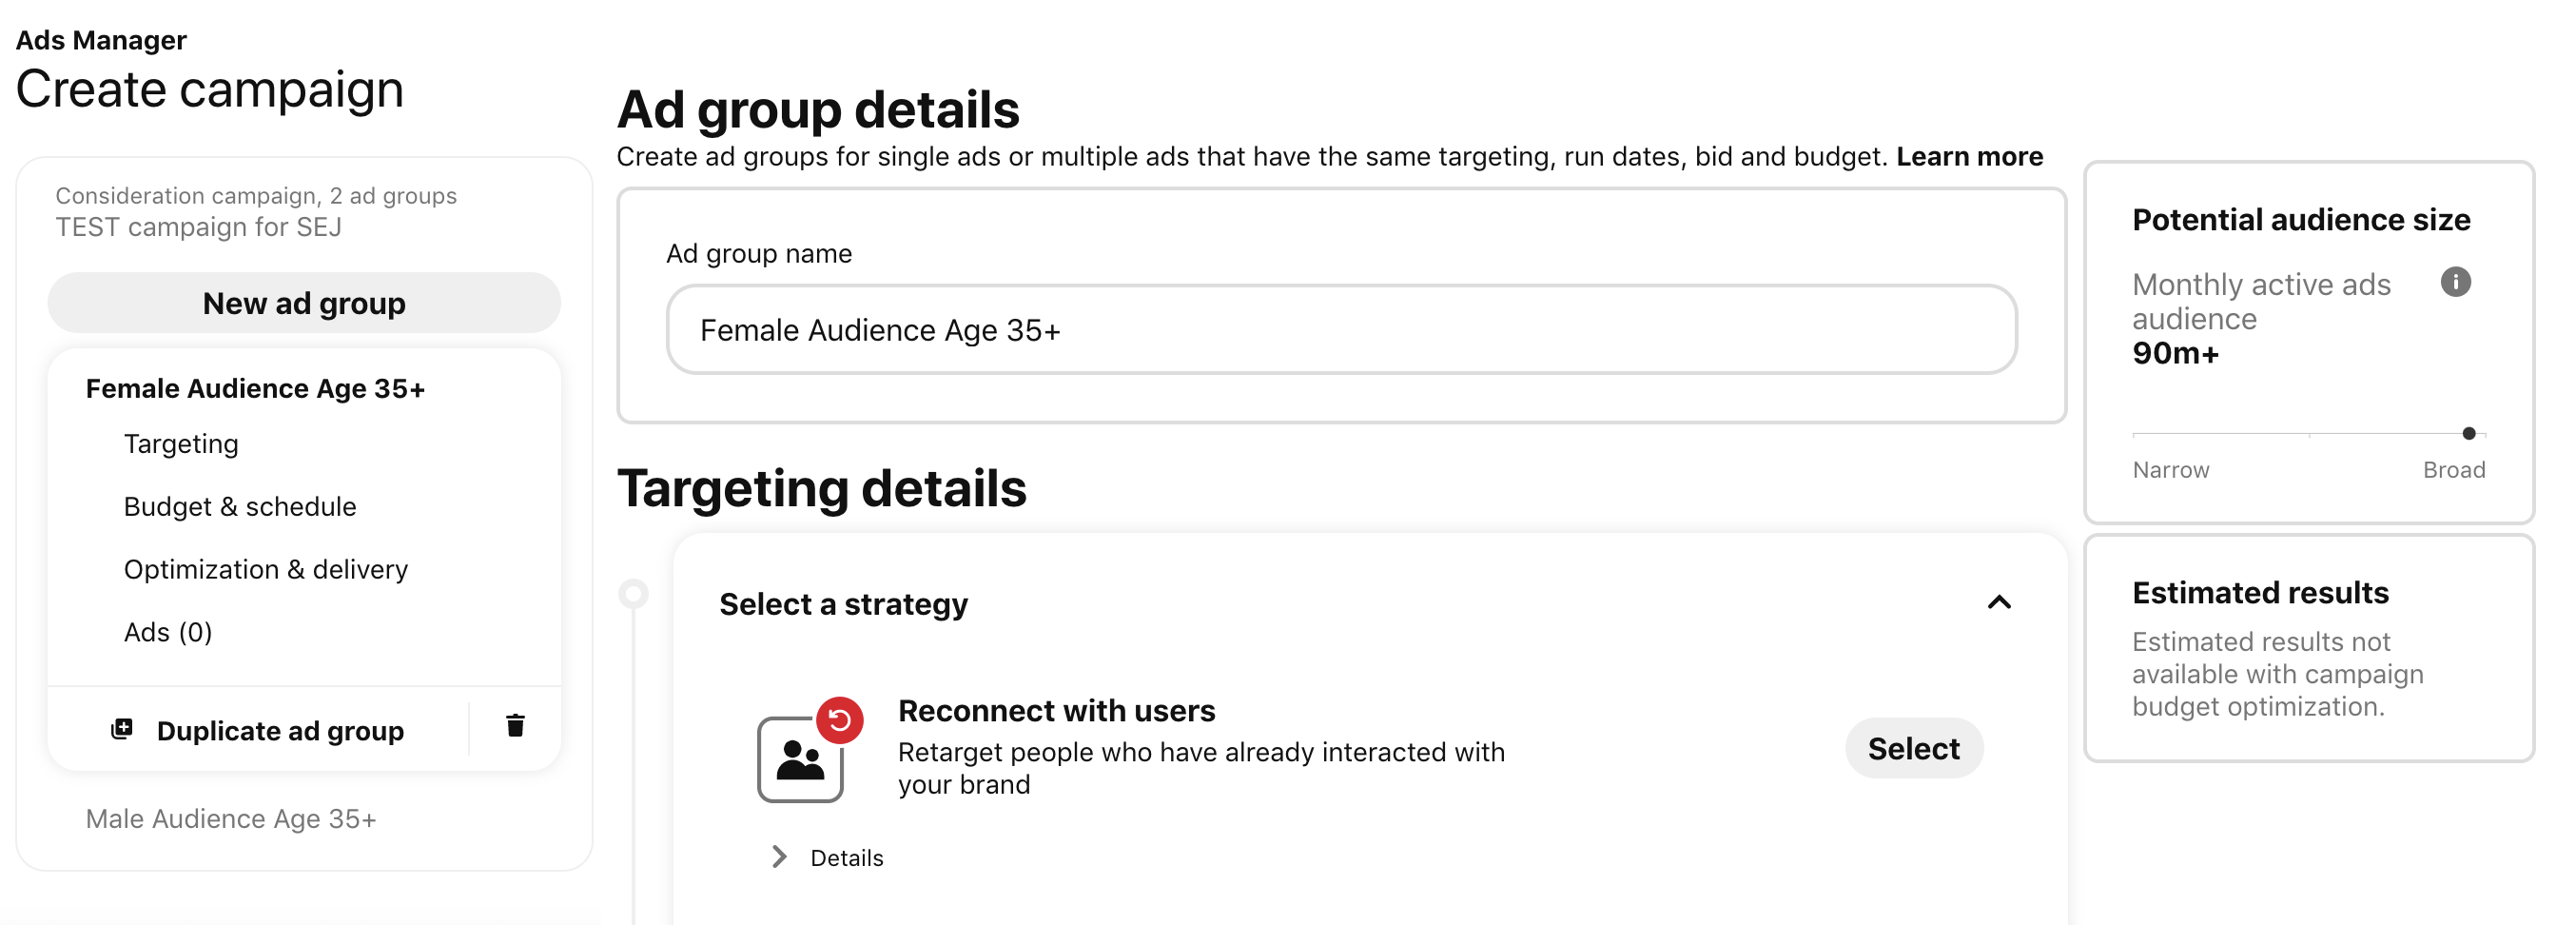 Create ad group details.